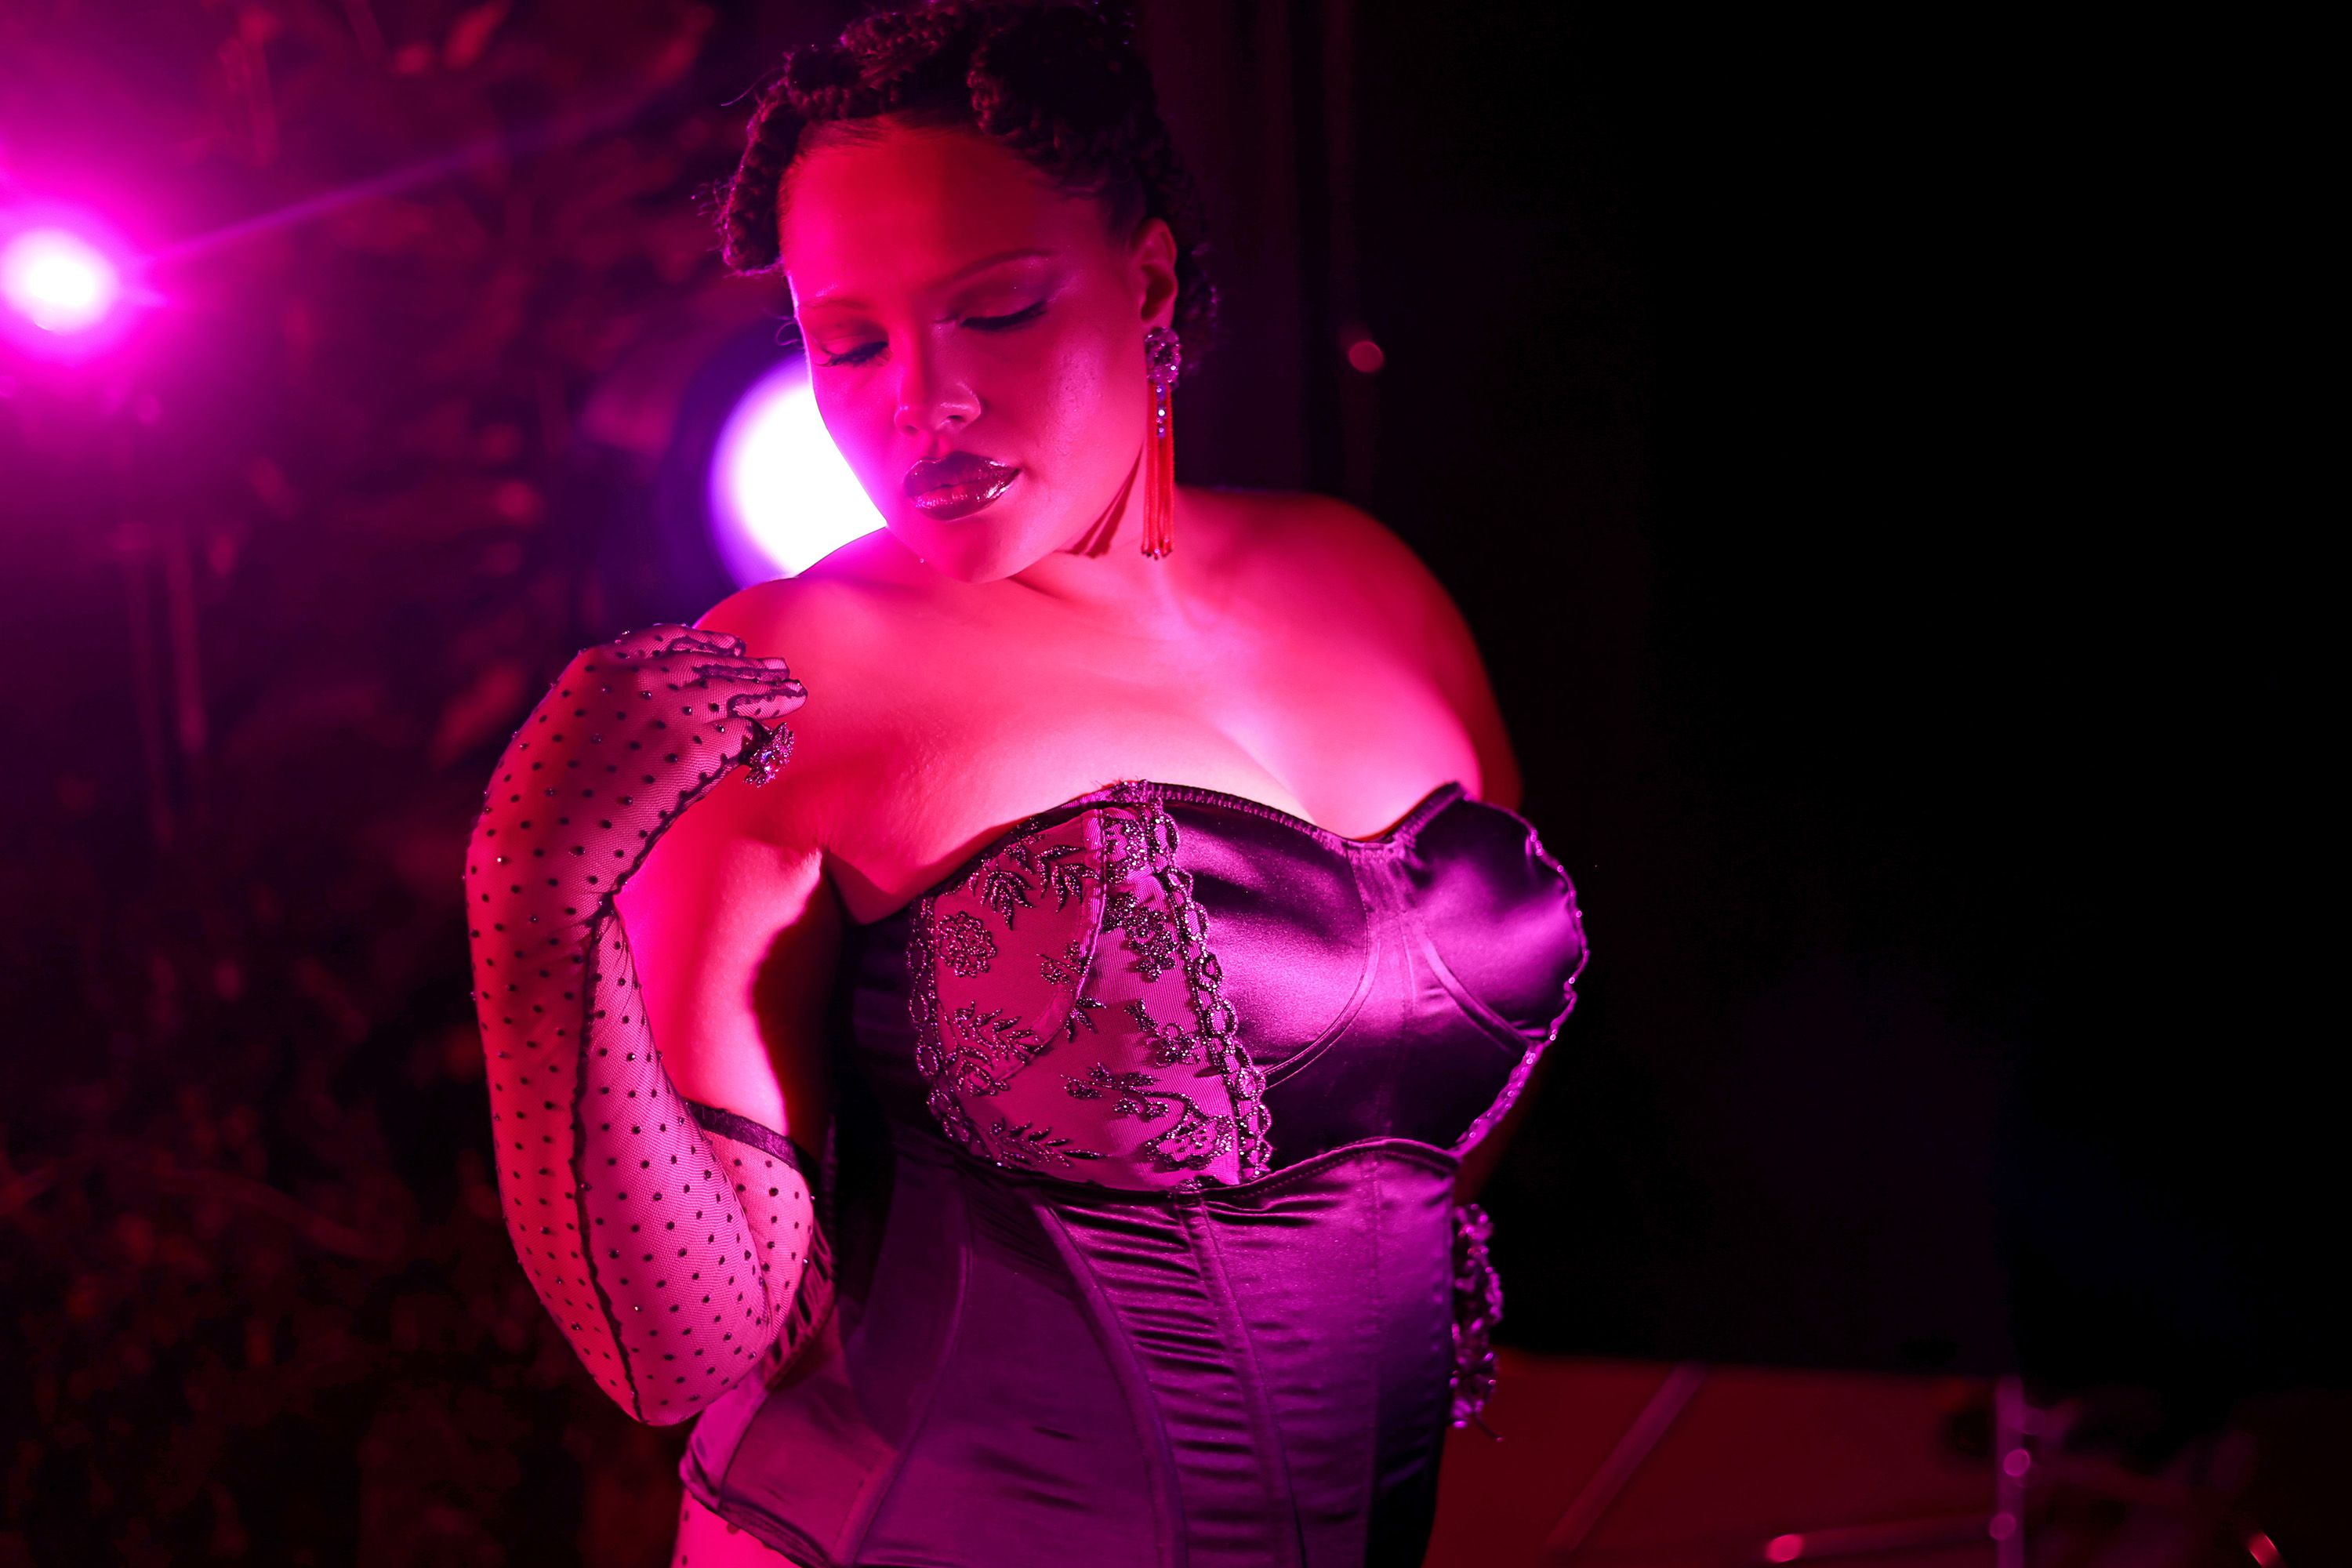 Rihanna praised for her "raw" Savage x Fenty lingerie show